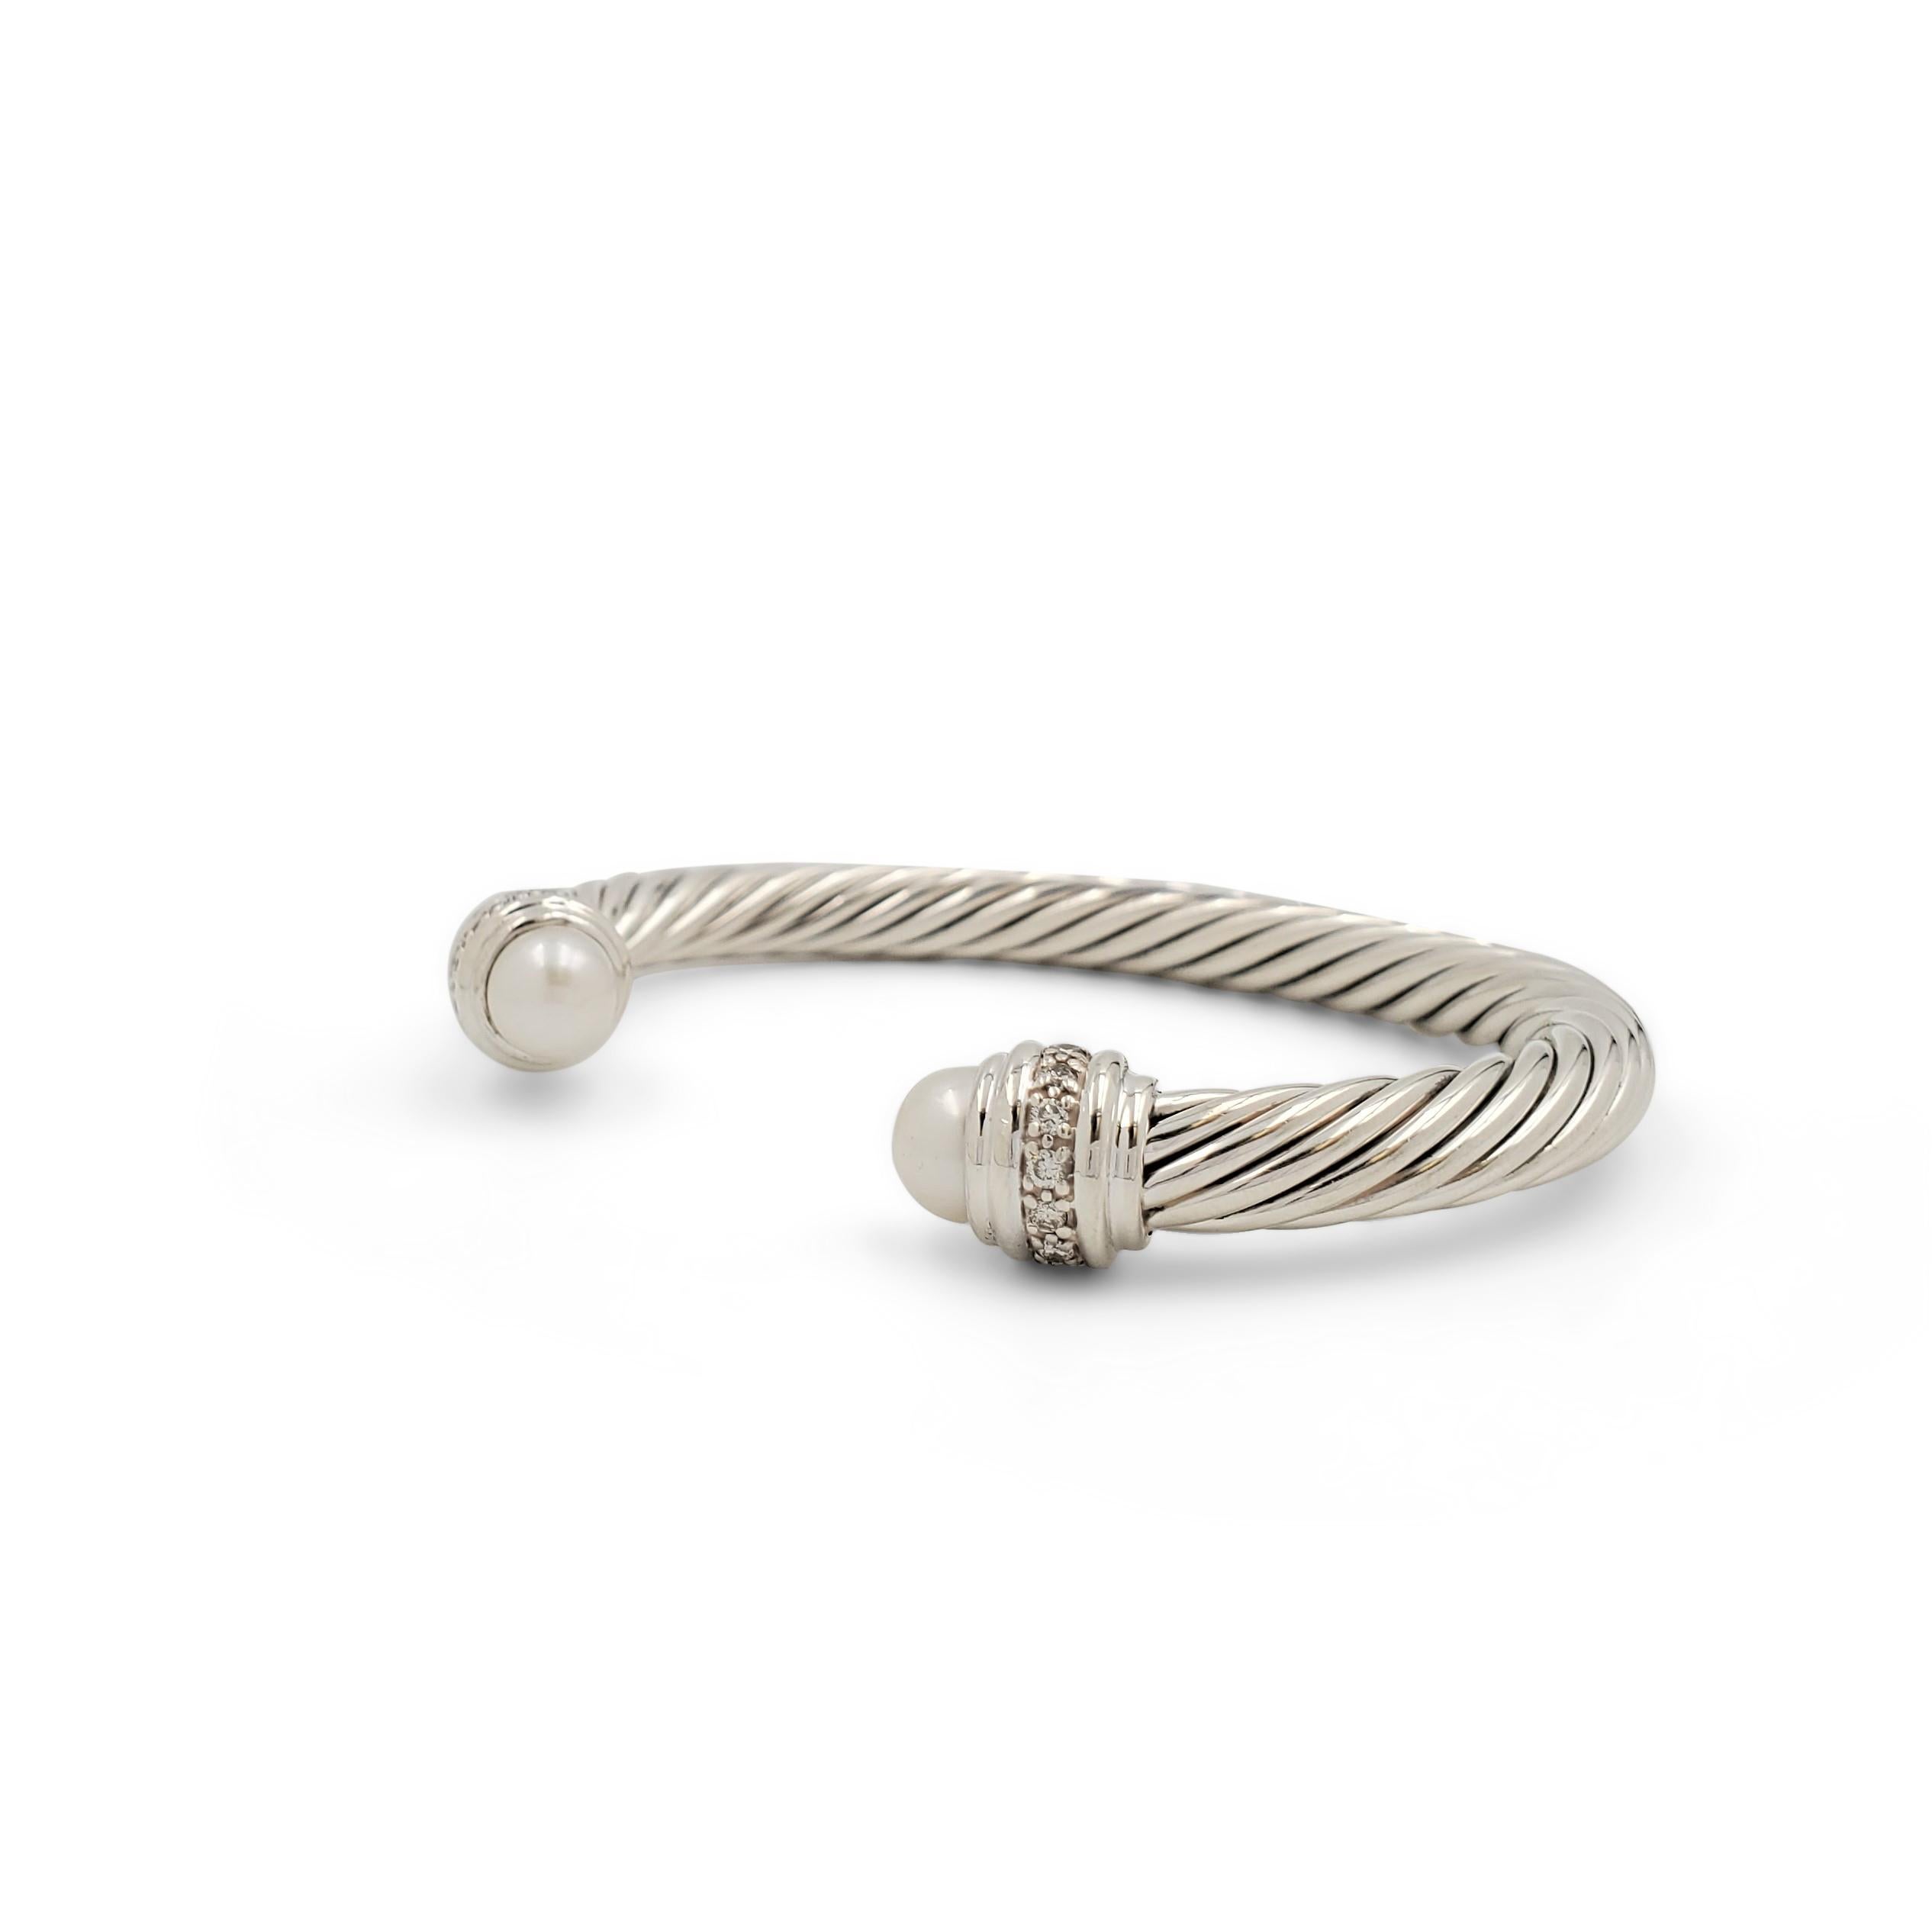 Authentic David Yurman bangle crafted in sterling silver. The bracelet is set with two pearls and approximately 0.25 carats of round brilliant cut diamonds (I-J color, VS-SI clarity) on either side of their iconic split bangle. Signed David Yurman,